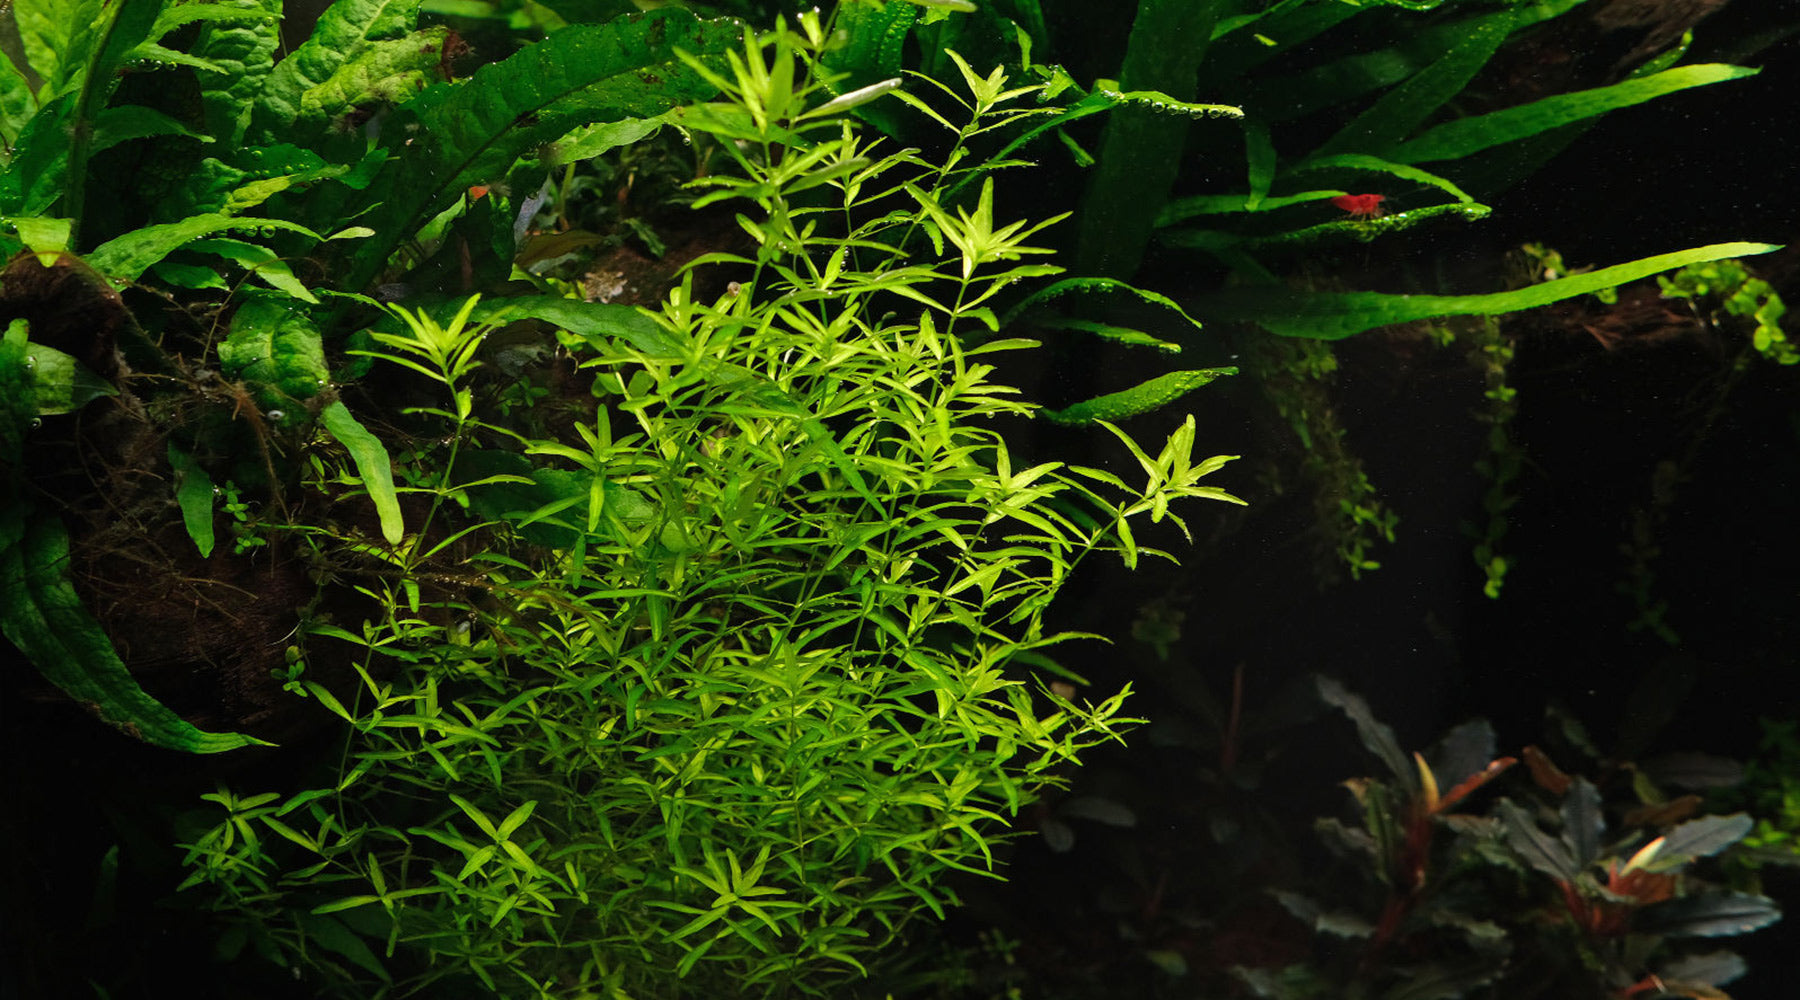 How to grow Hemianthus glomeratus ; Pearlweed/Baby tears/Hemianthus micranthemoides